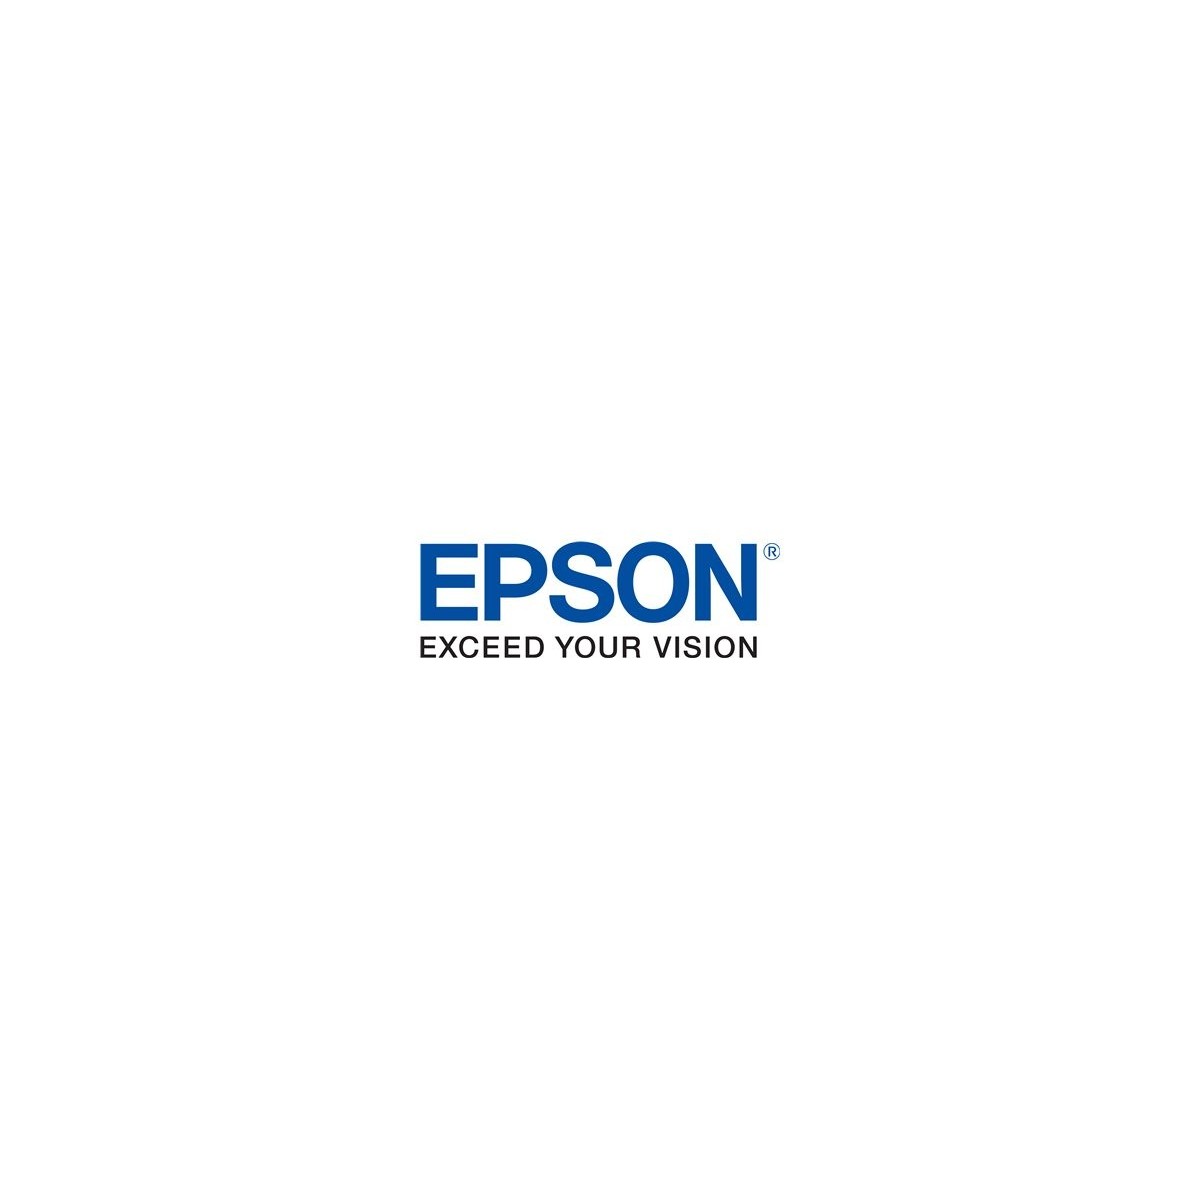 Epson EPL-N3000 Imaging Cartridge VDT - 17000 pages - Black - 1 pc(s)